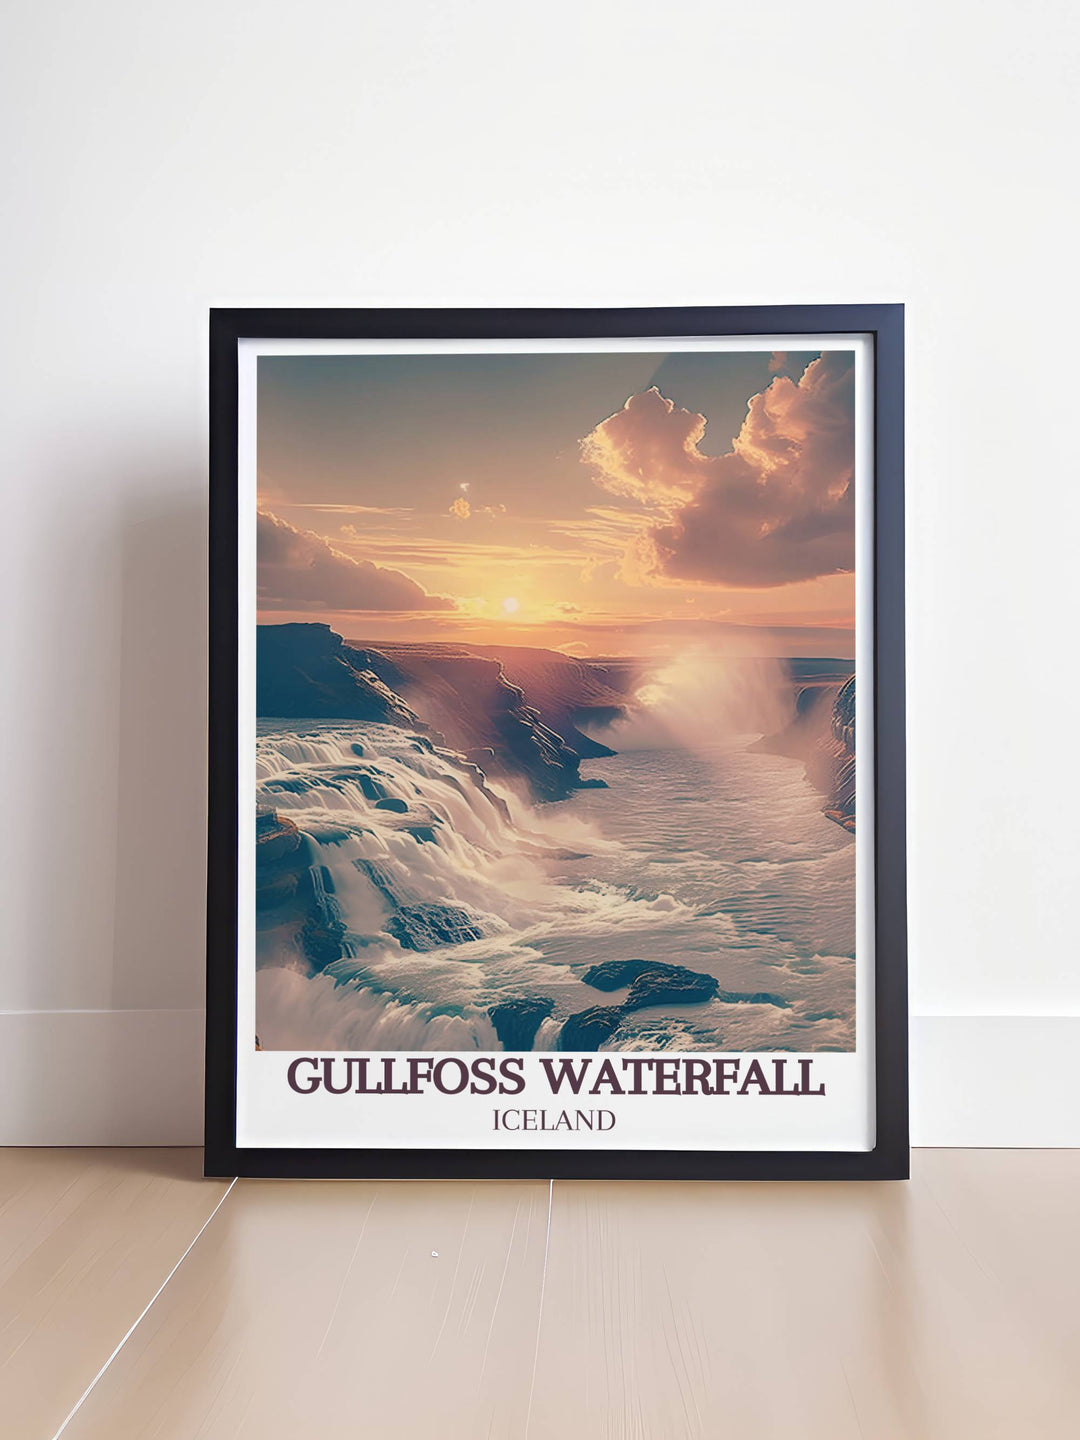 Winter view of Gullfoss Waterfall, where icy waters meet snow, captured in a framed art print for home or office decor